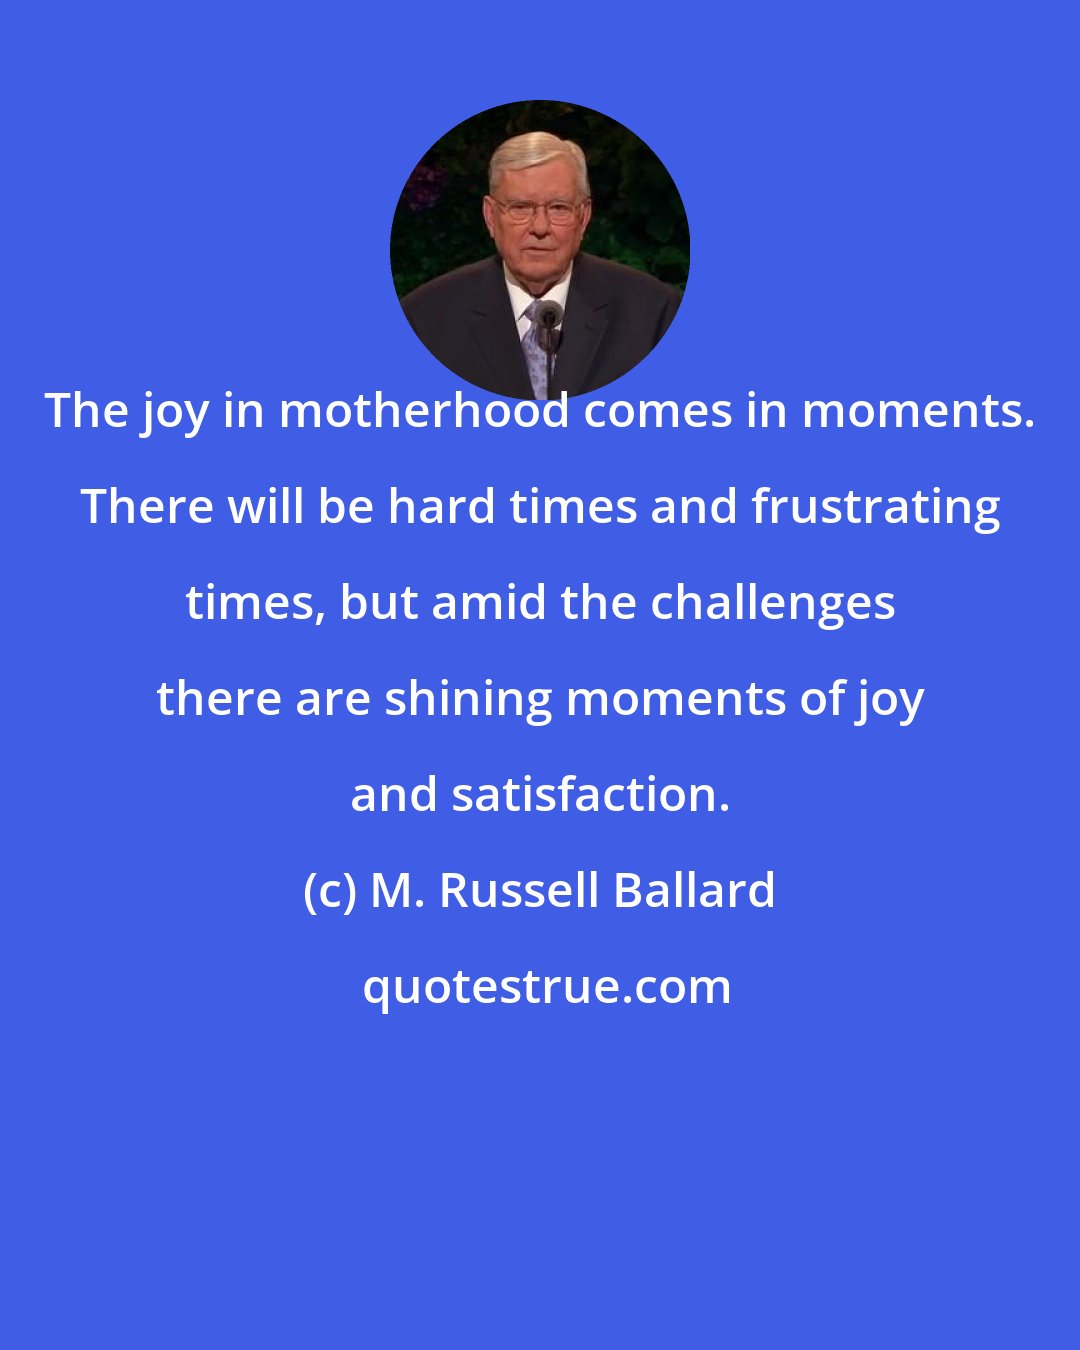 M. Russell Ballard: The joy in motherhood comes in moments. There will be hard times and frustrating times, but amid the challenges there are shining moments of joy and satisfaction.